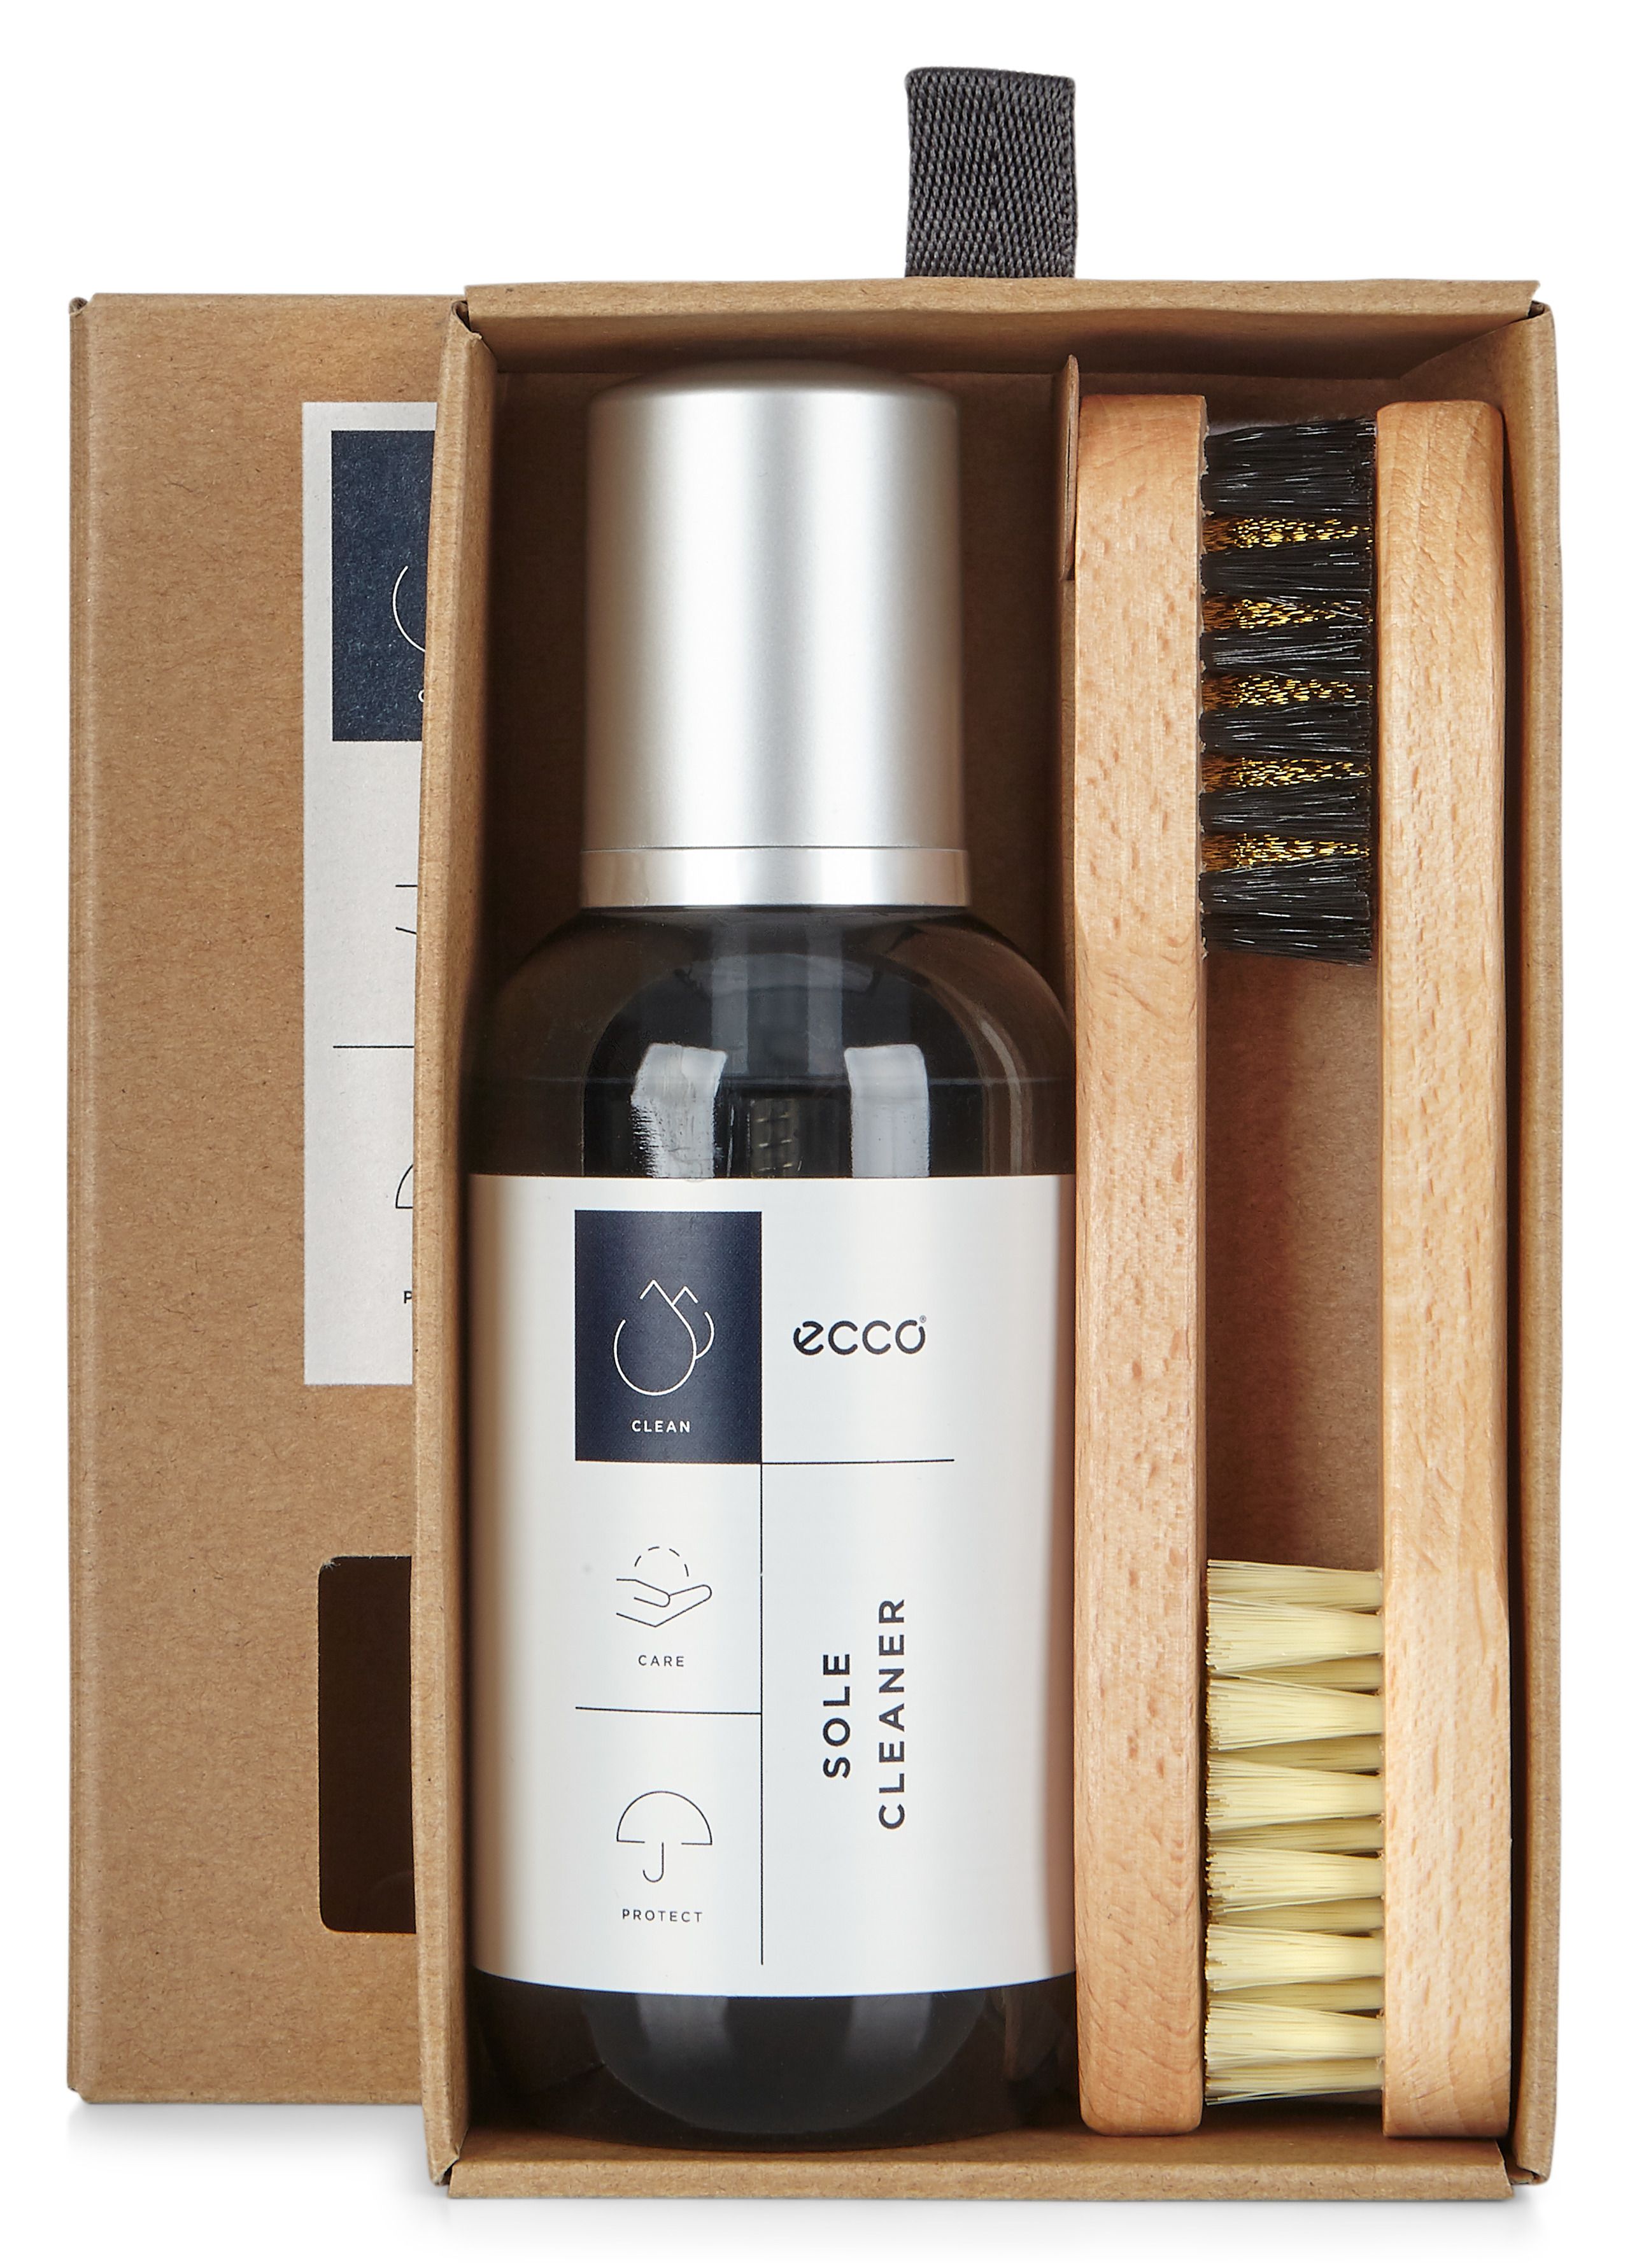 ecco midsole cleaning kit